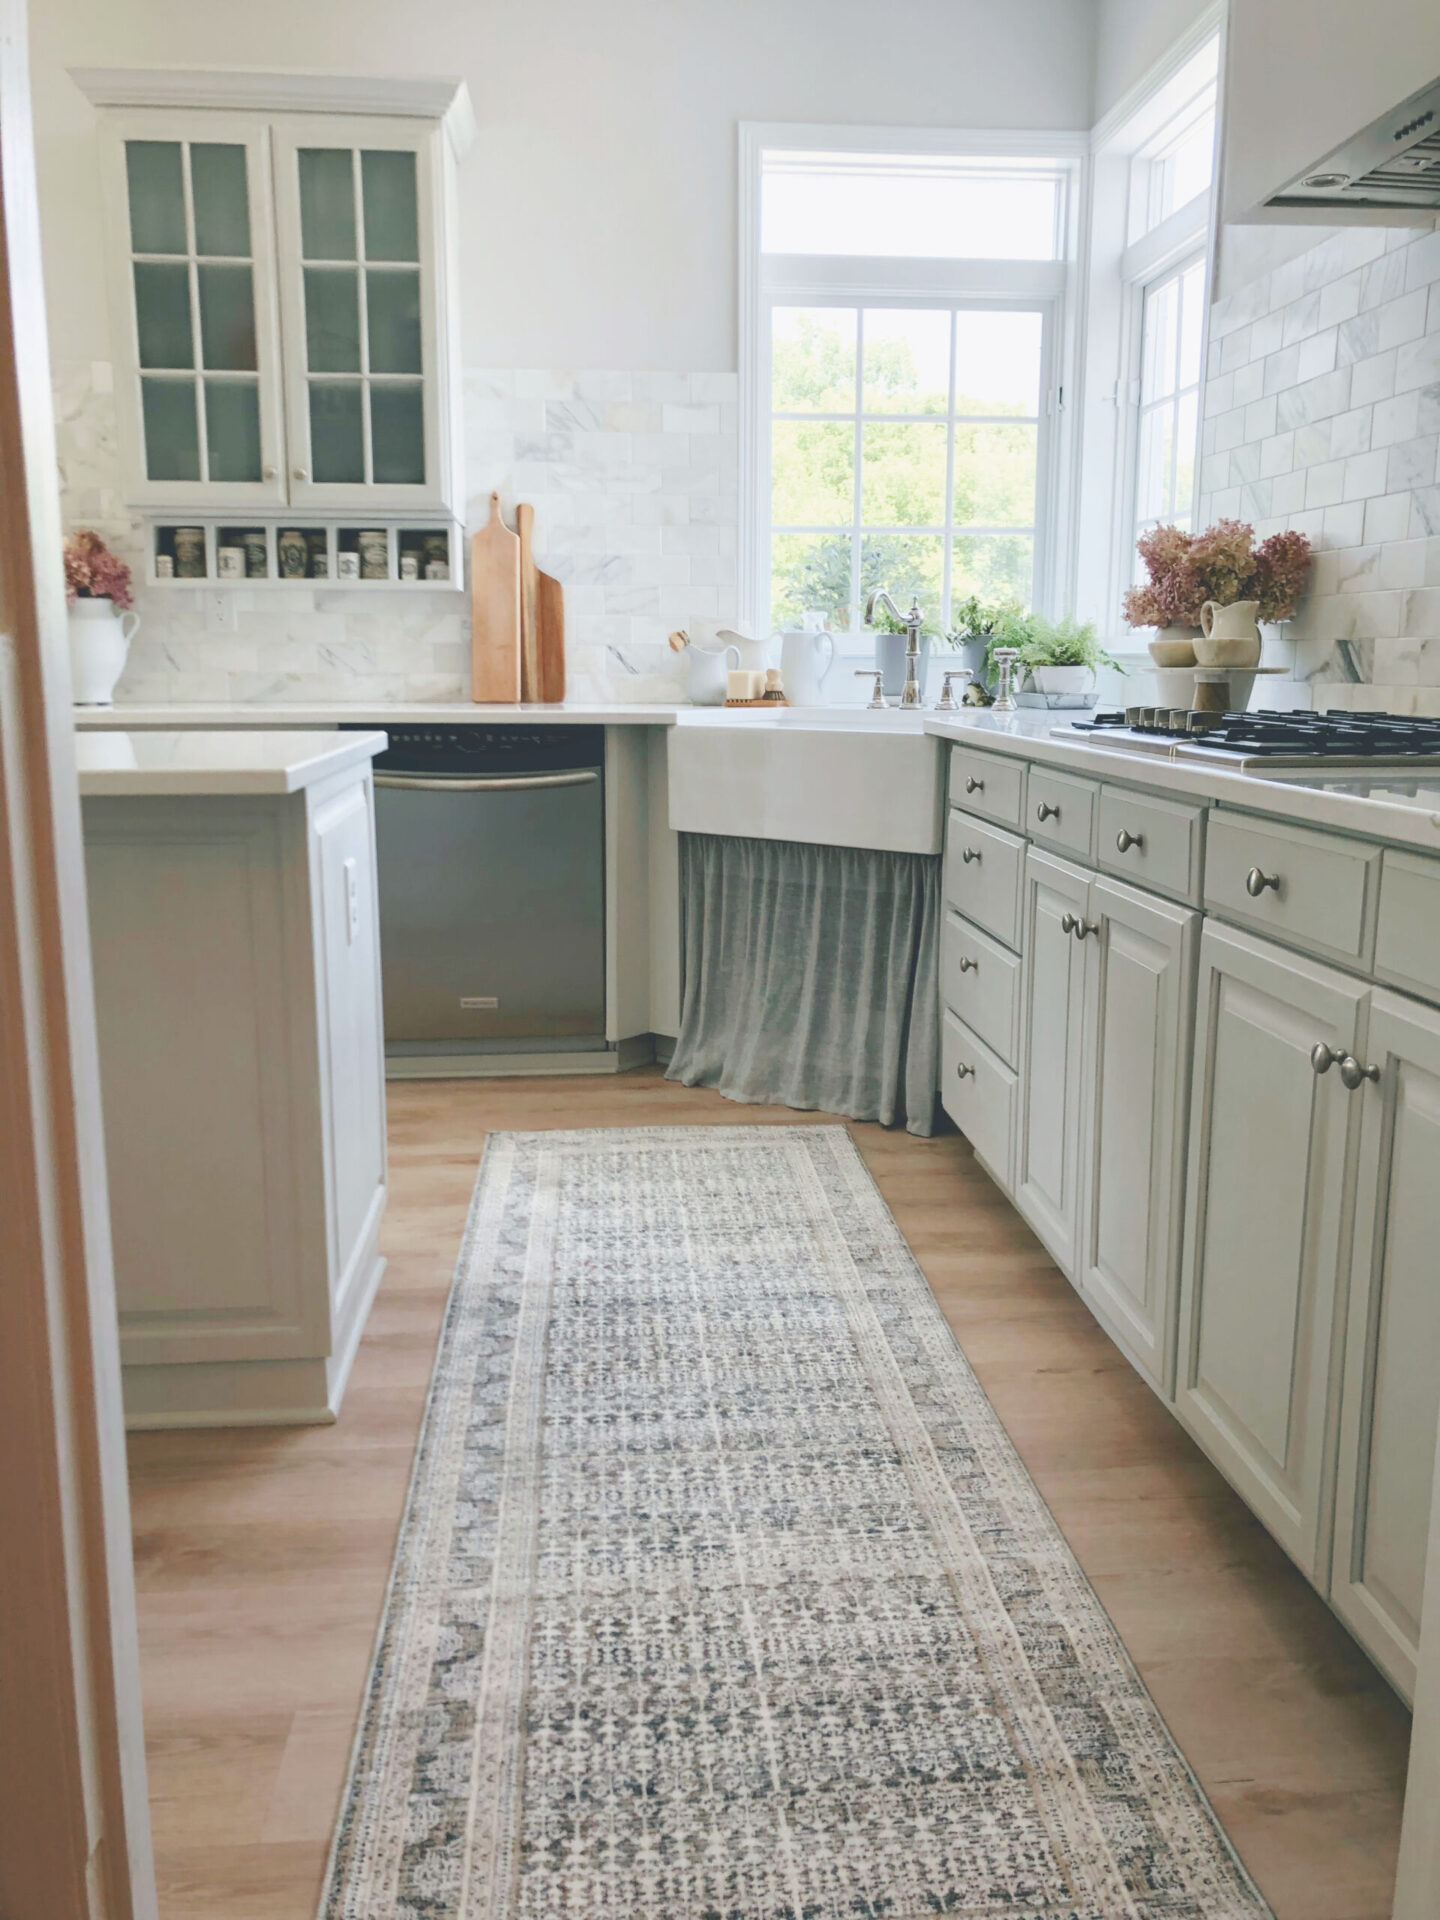 Hello Lovely's renovated Modern French kitchen with Amber Lewis/Loloi rug, F&B Pavilion Gray cabinets, and skirted farm sink. #modernfrench #europeancountrykitchen